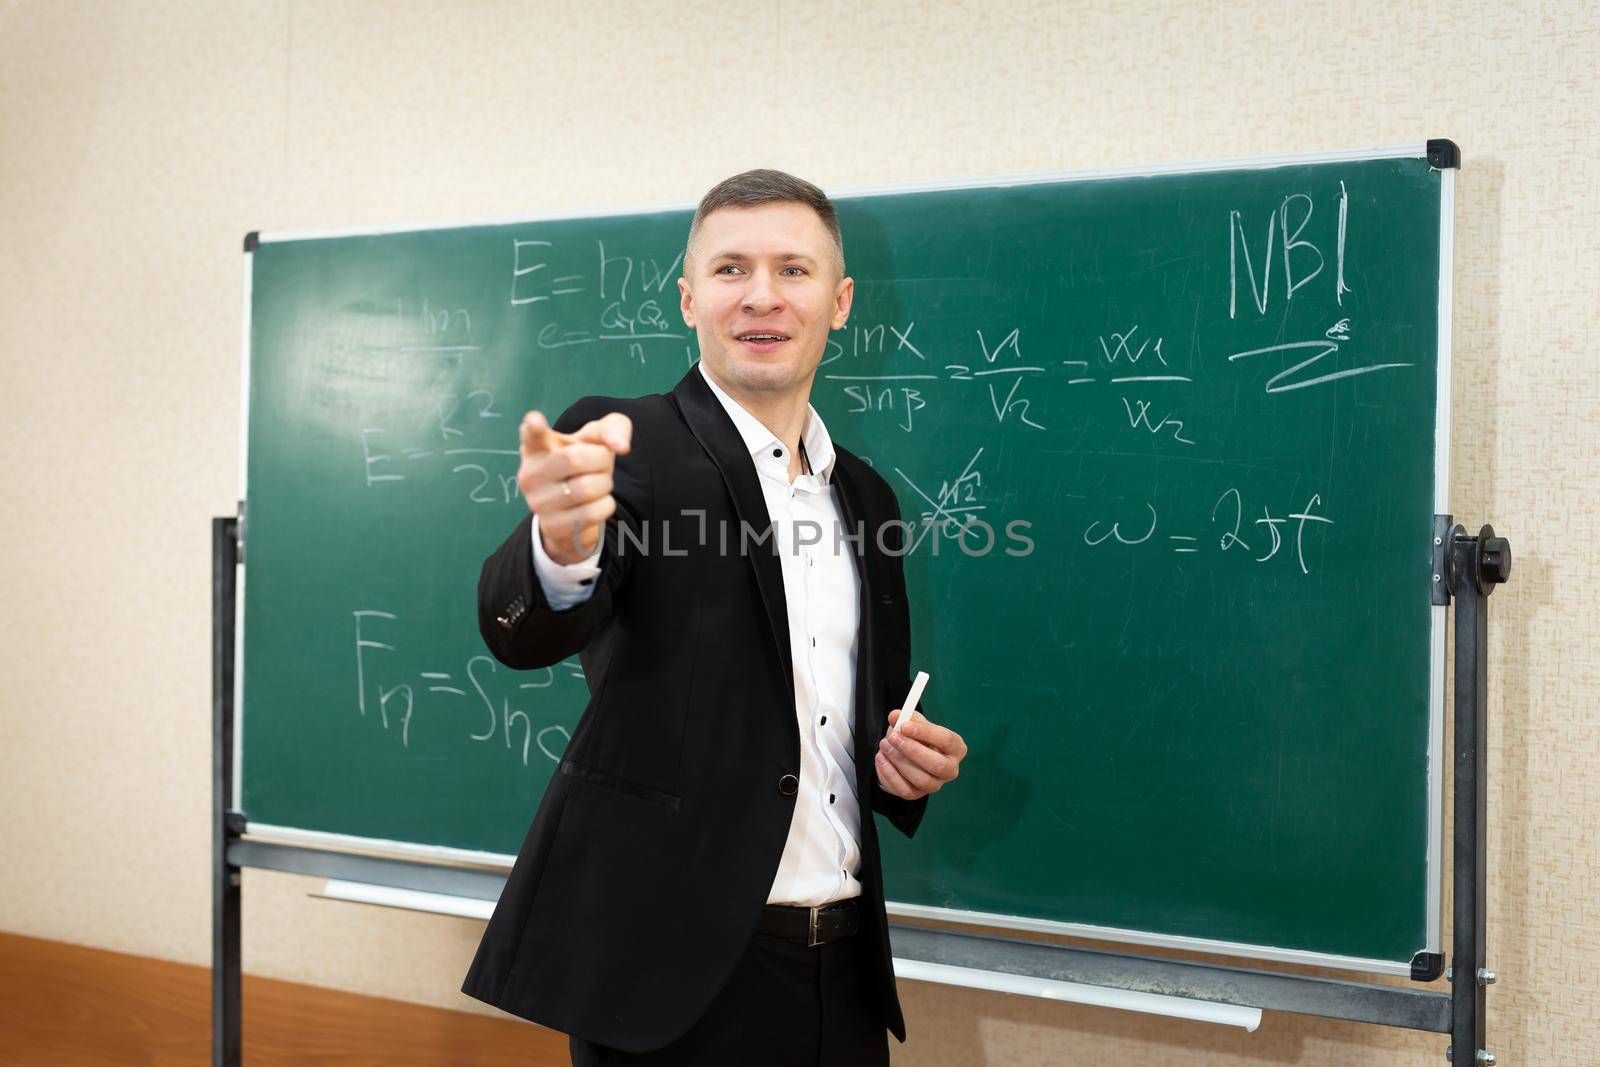 The male teacher used white chalk to write on the blackboard to teach students in a class by StudioPeace